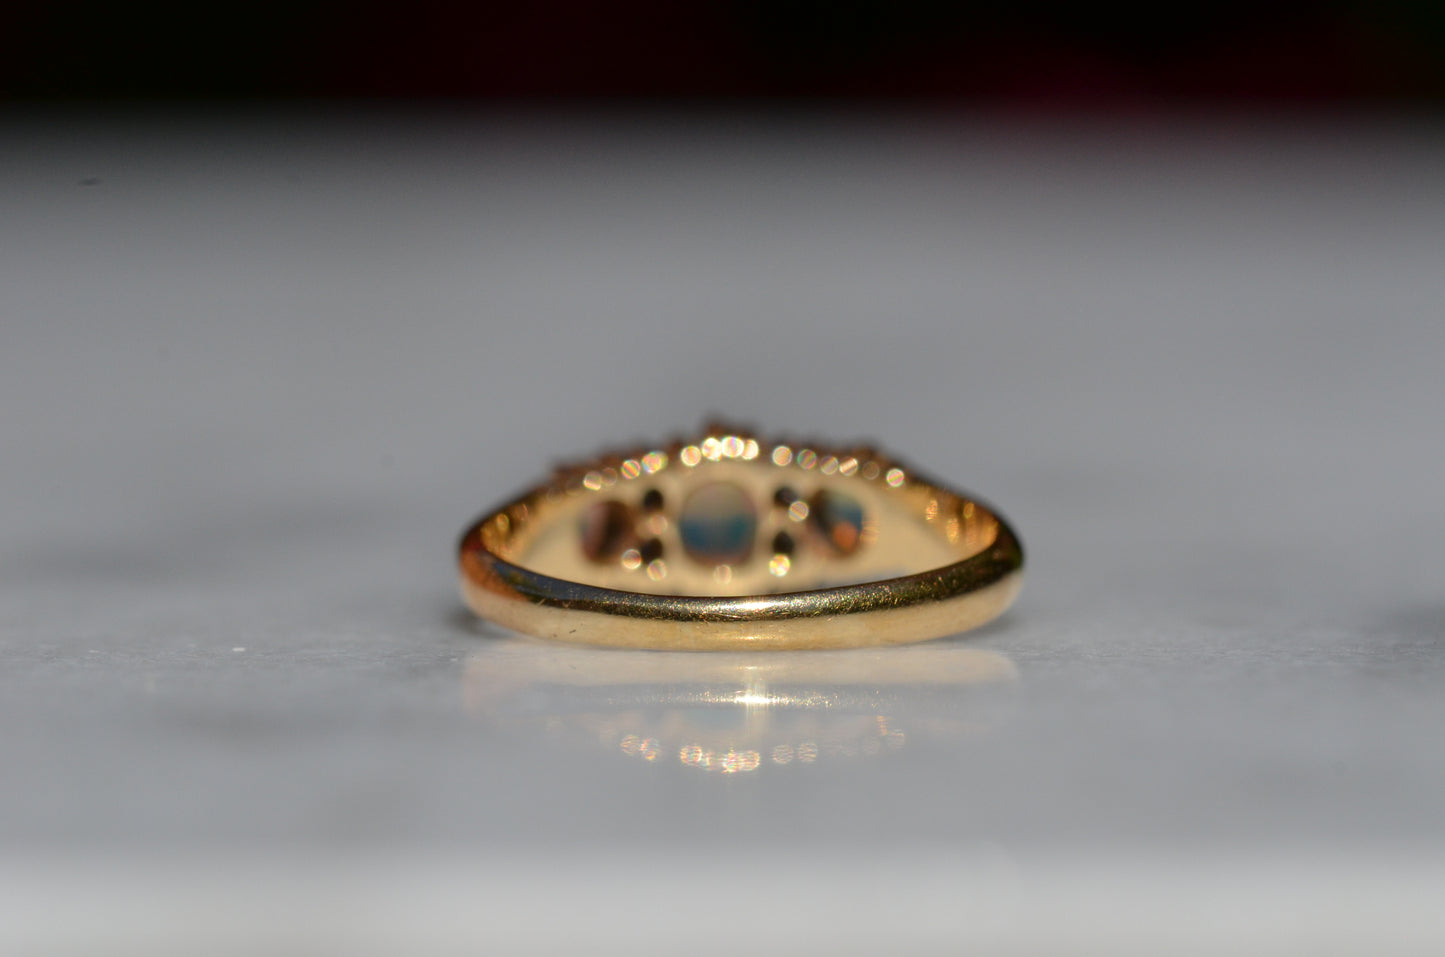 A closely-cropped macro of the Victorian ring, showcasing the strong green and blue play of color in the opals with a hint of violet and orange. The ring is photographed from the back, focused on the smooth deep yellow gold band.